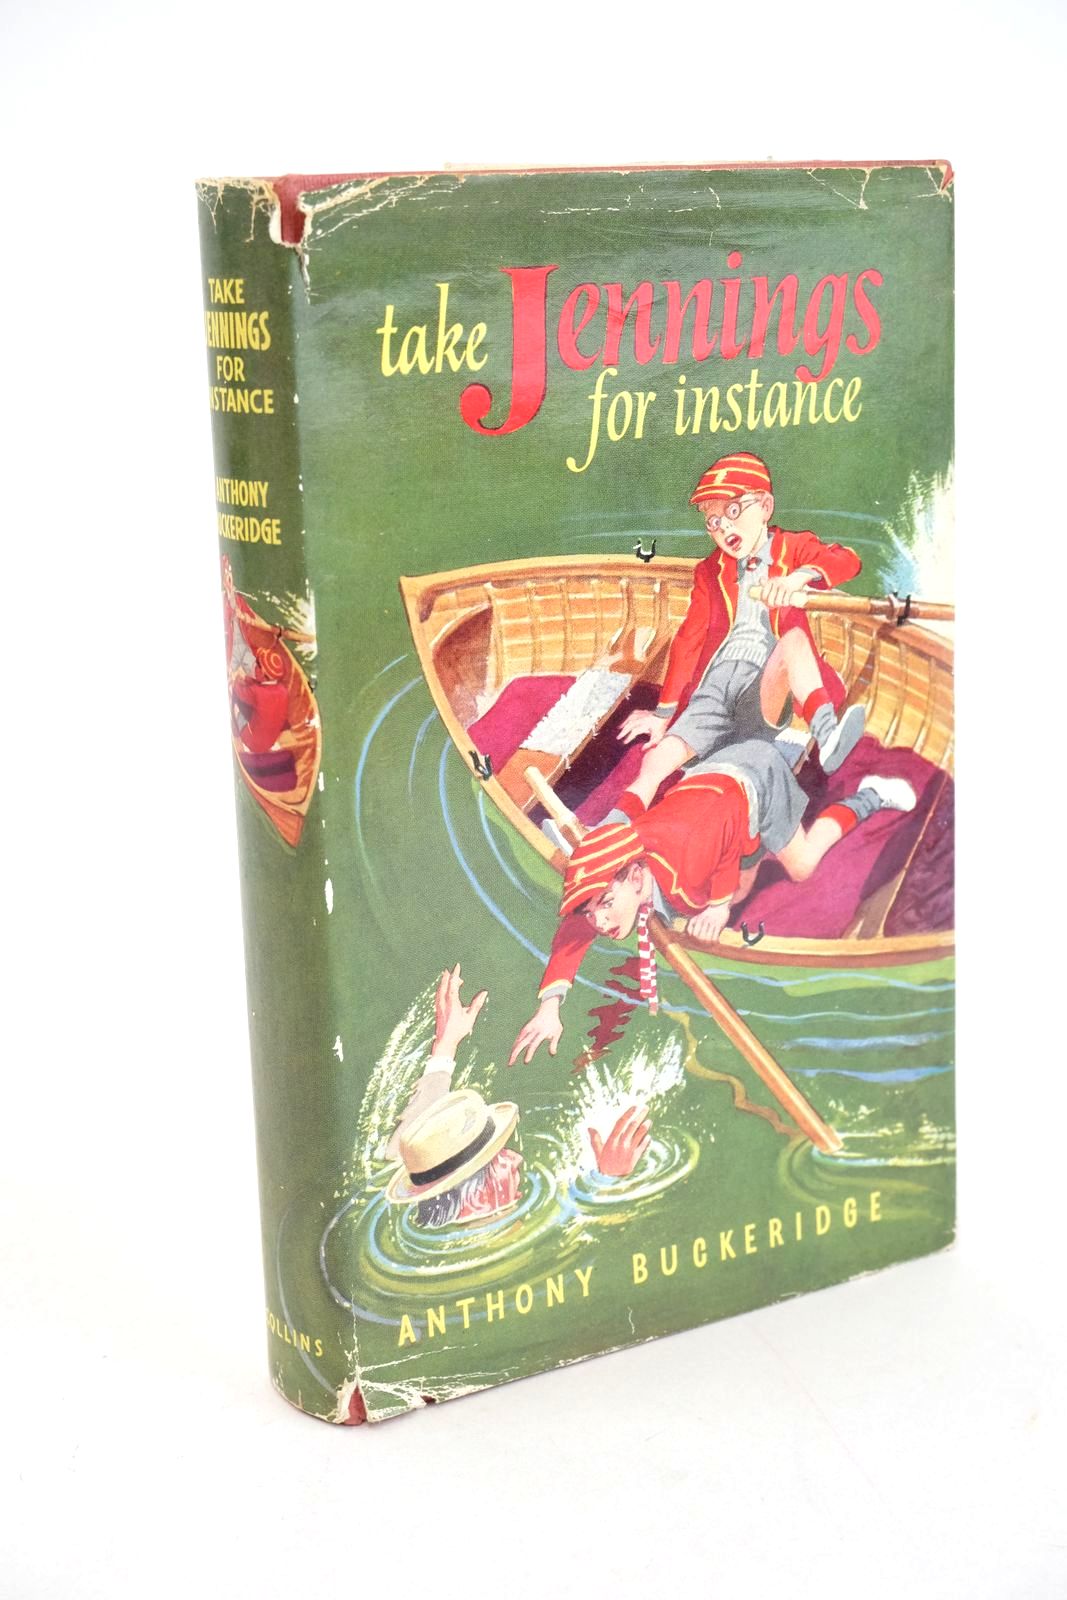 Photo of TAKE JENNINGS FOR INSTANCE written by Buckeridge, Anthony illustrated by Mays, published by Collins (STOCK CODE: 1327525)  for sale by Stella & Rose's Books